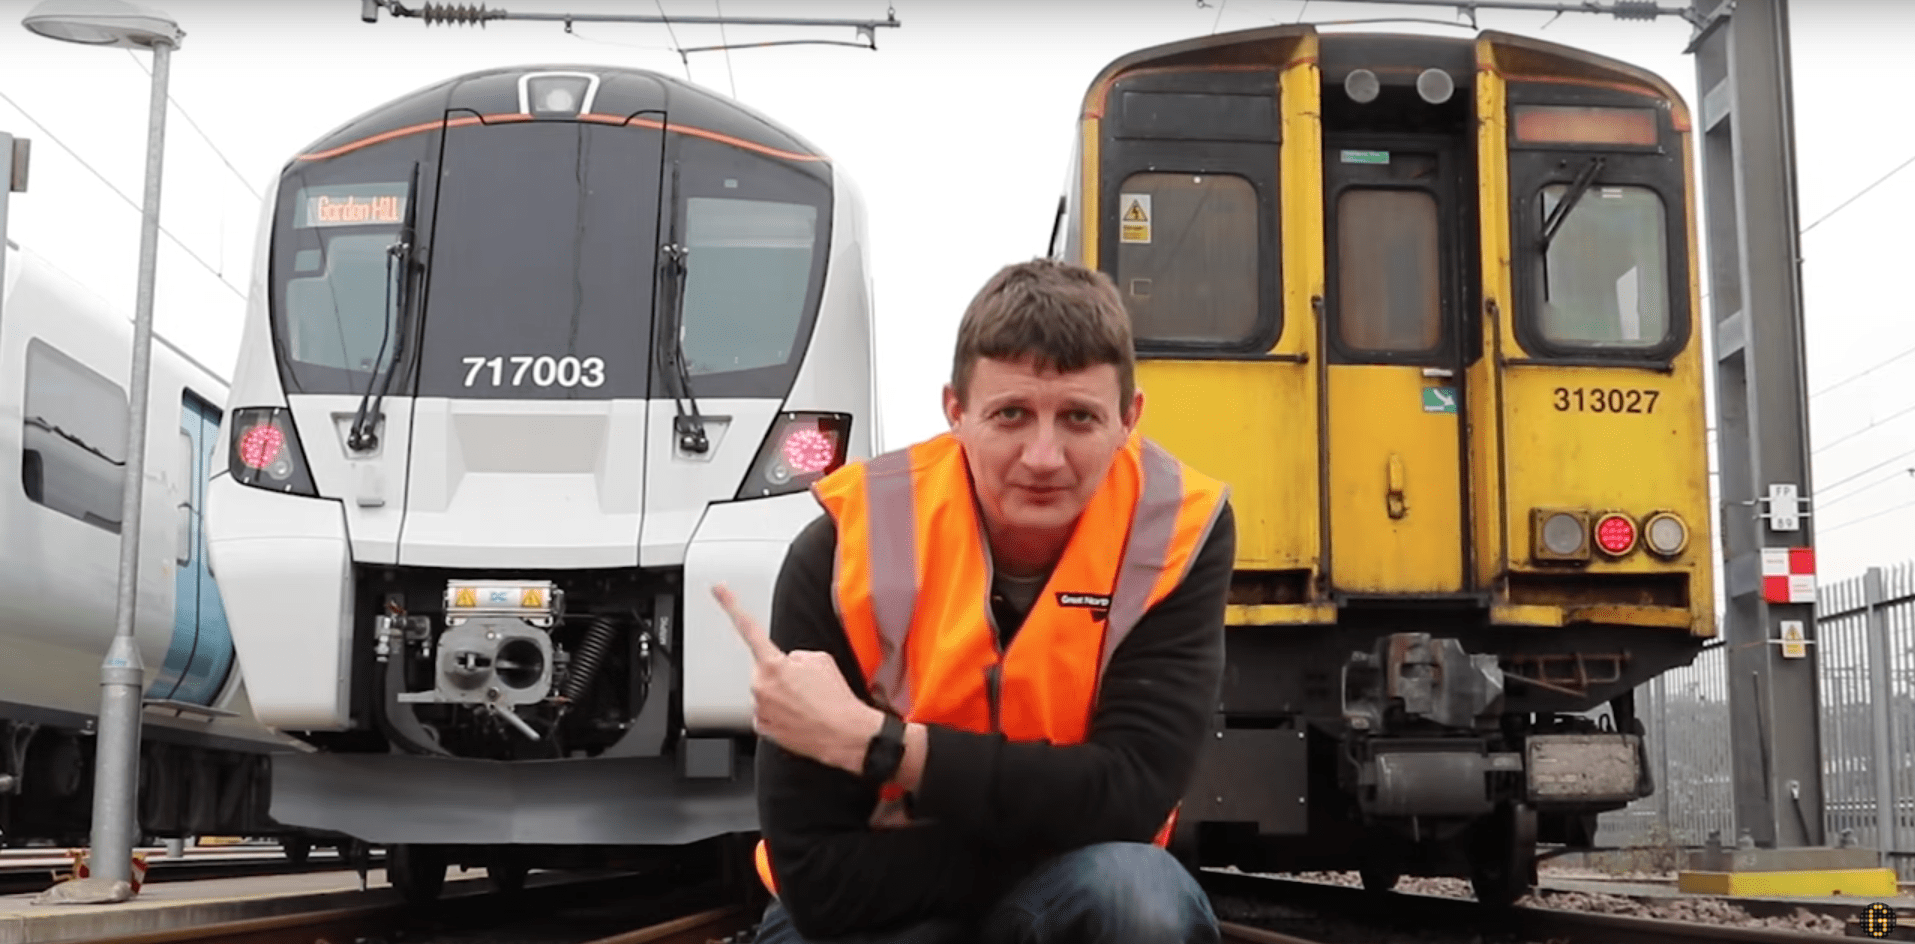 GTR (Govia Thameslink Railway) are rolling out their new trains on the Northern City Line out of Moorgate (replacing 40 year old units) and invented video journalist Geoff Marshall along on a test trip.